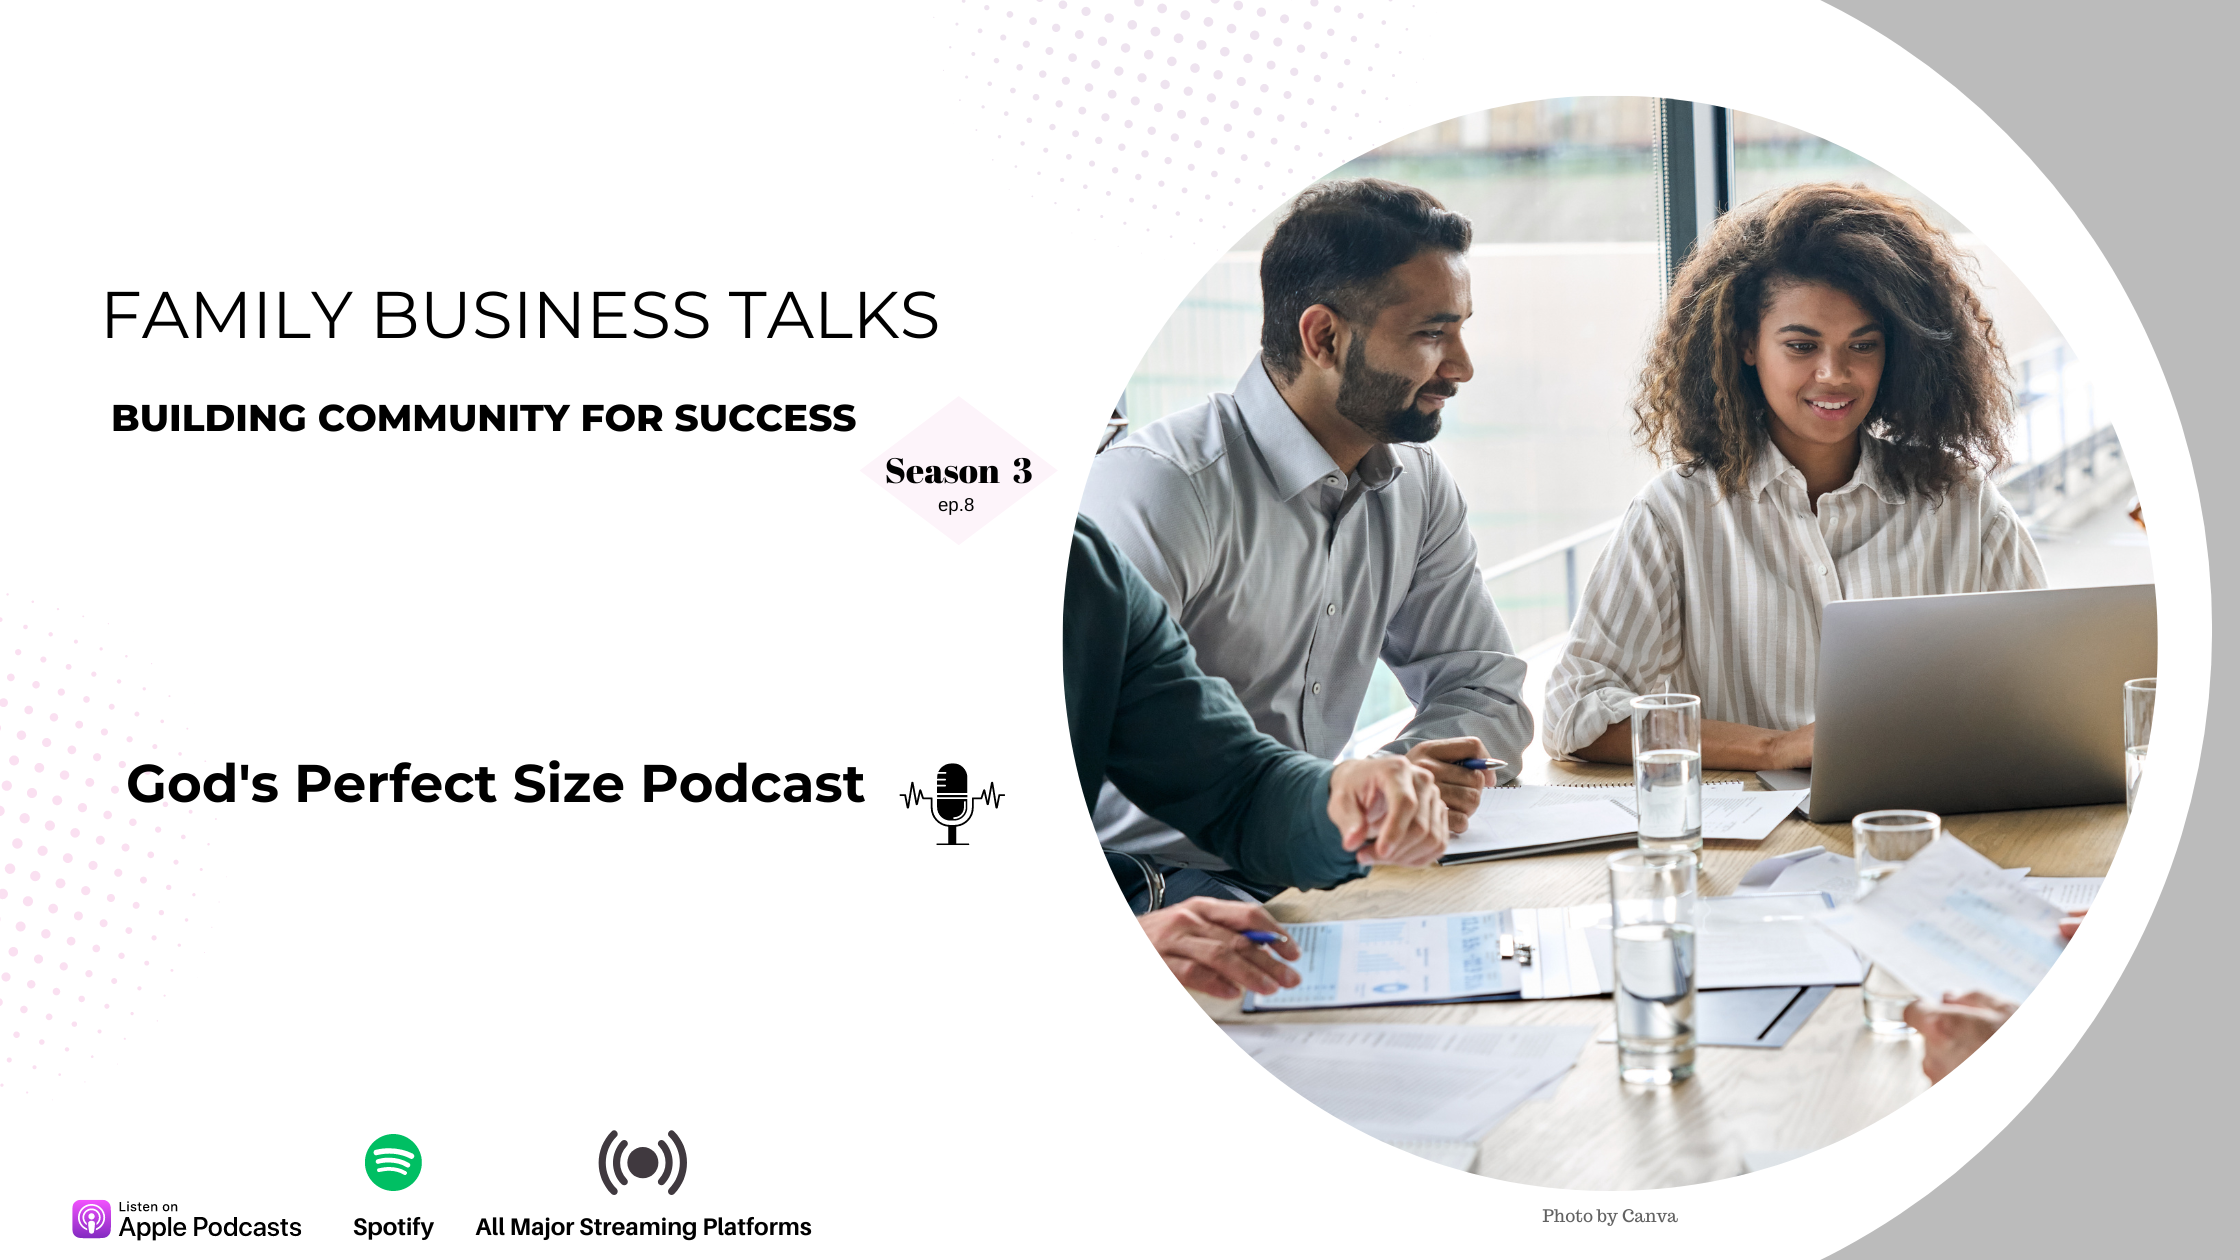 Family Business Talks: Building Community for Success!